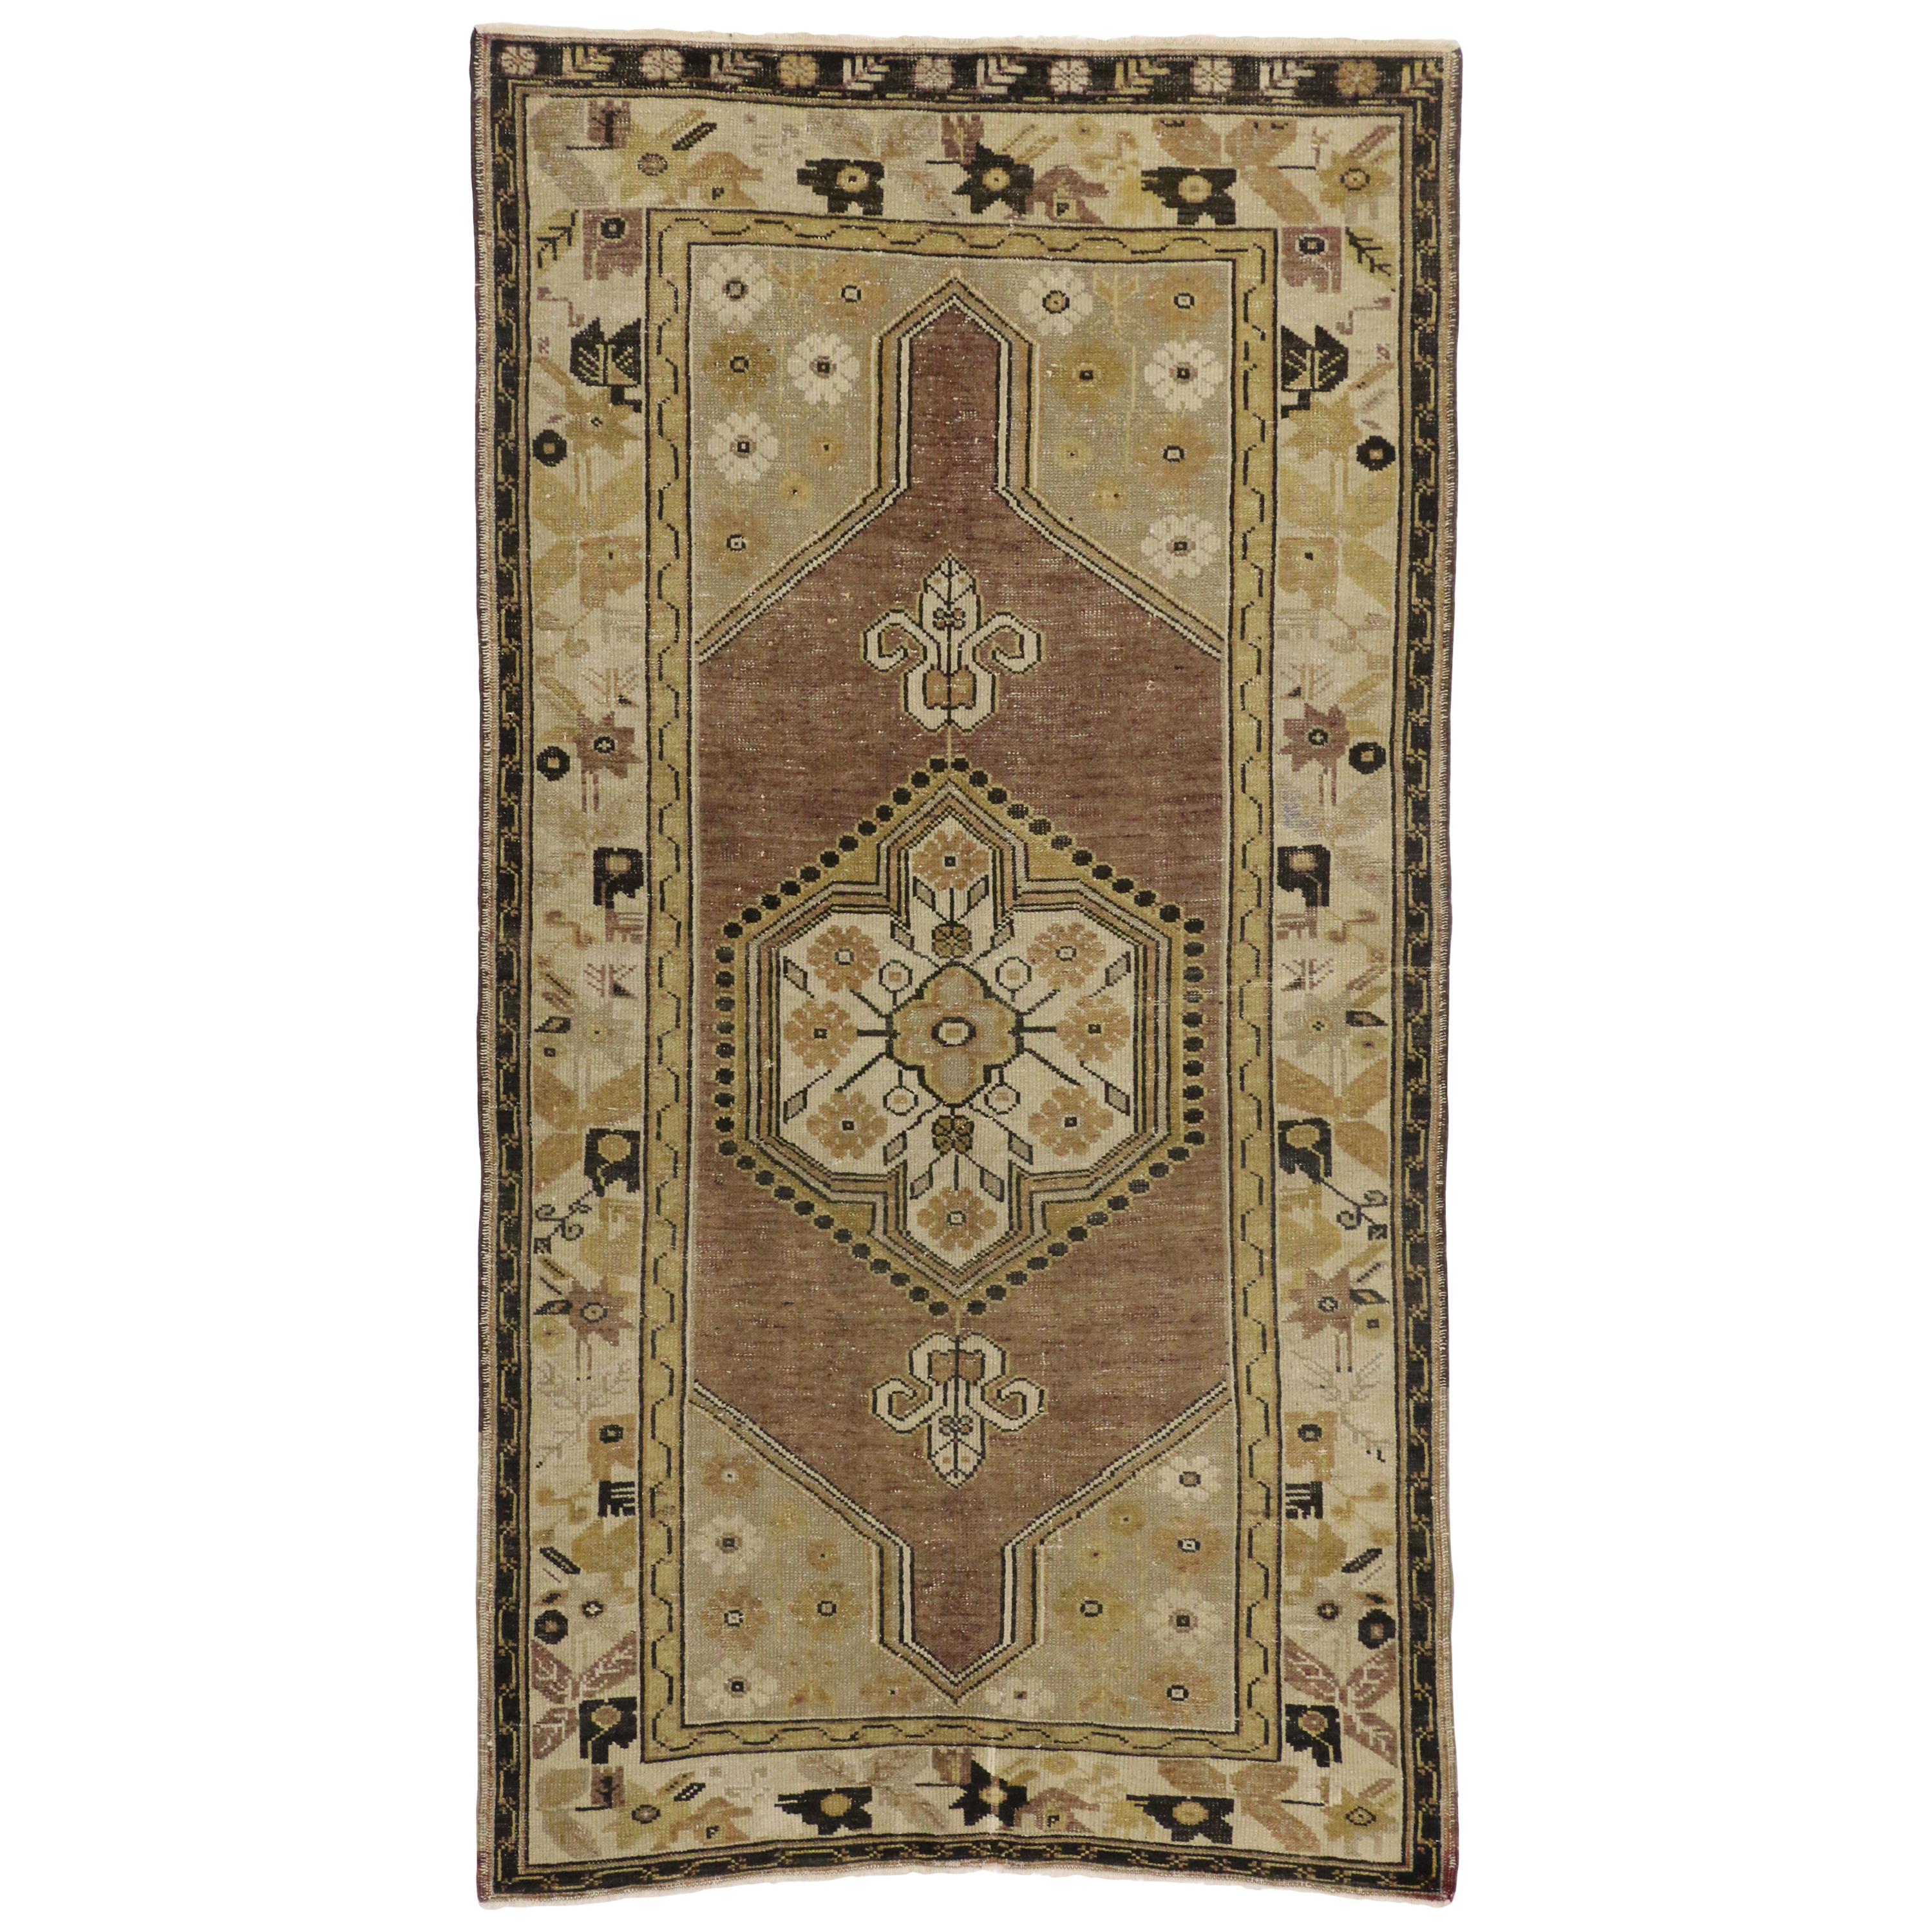 Vintage Turkish Oushak Rug with Rustic American Colonial Style